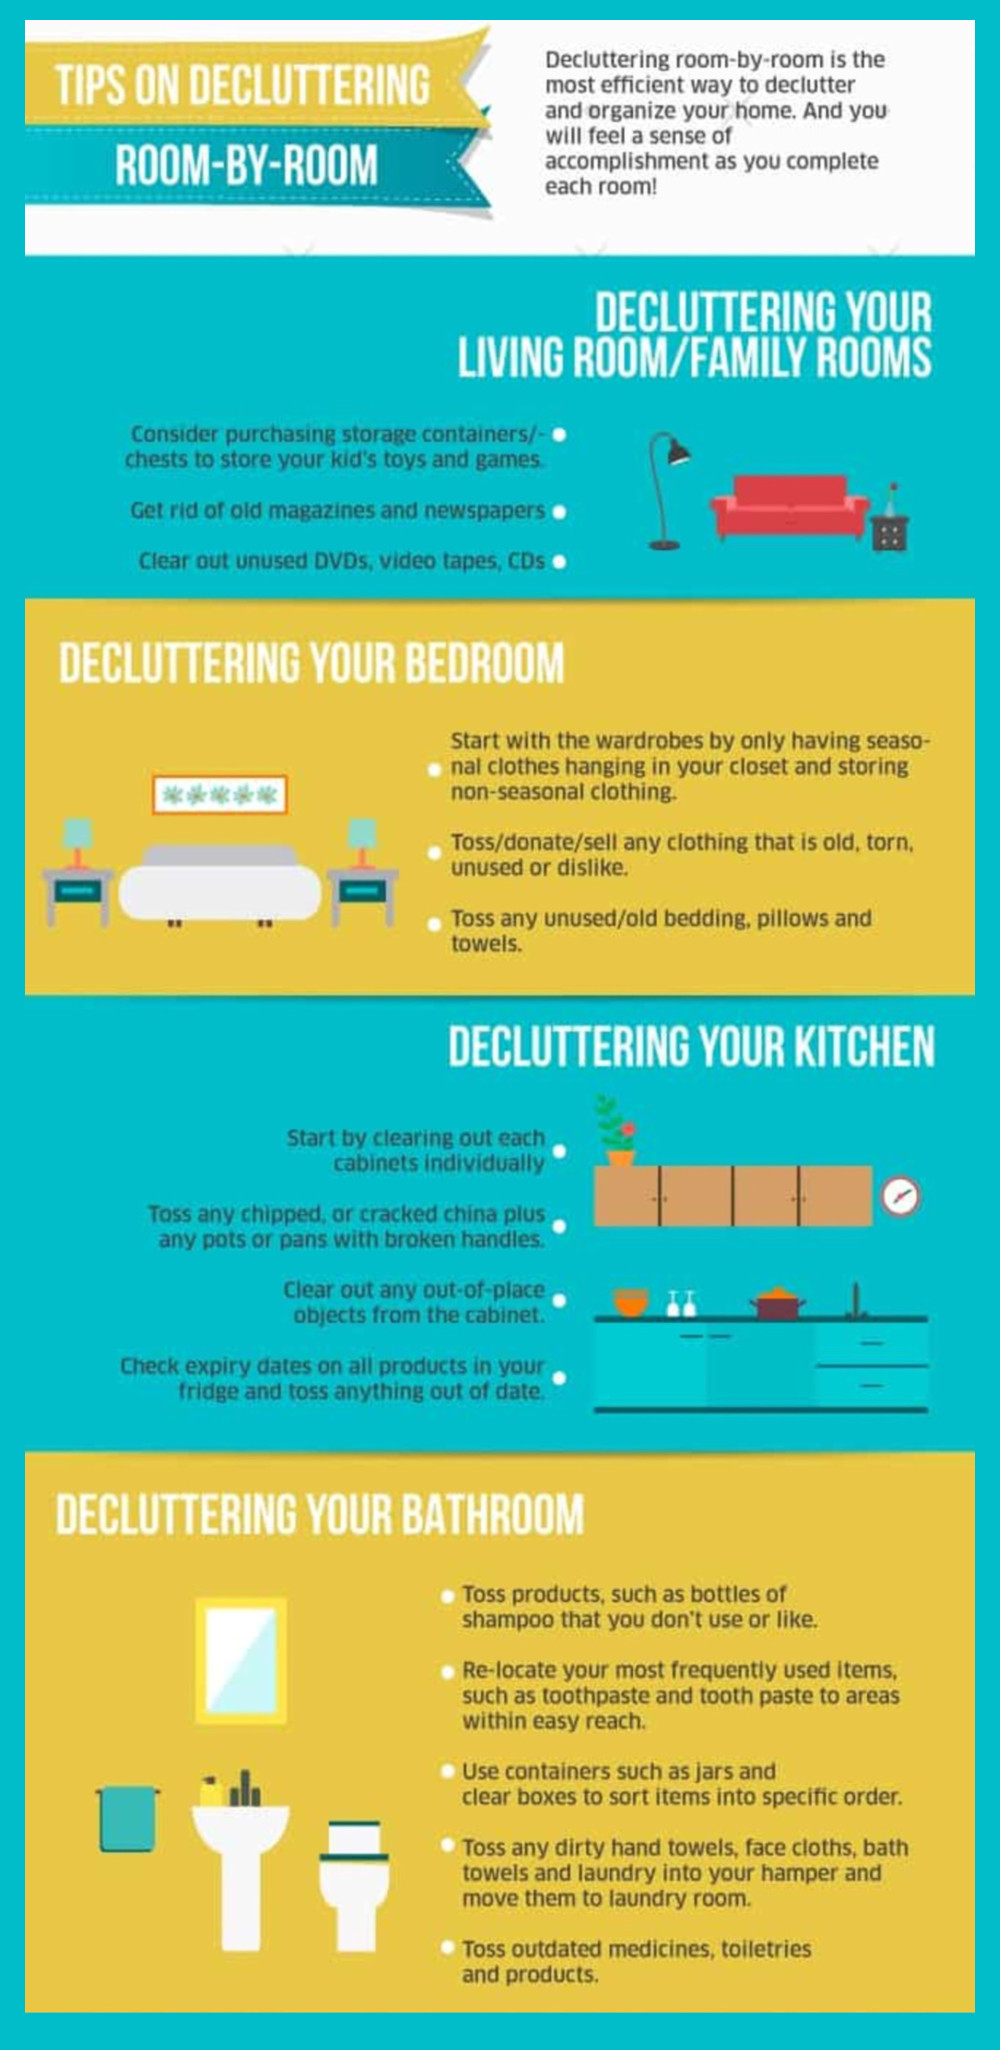 tips for decluttering room by room